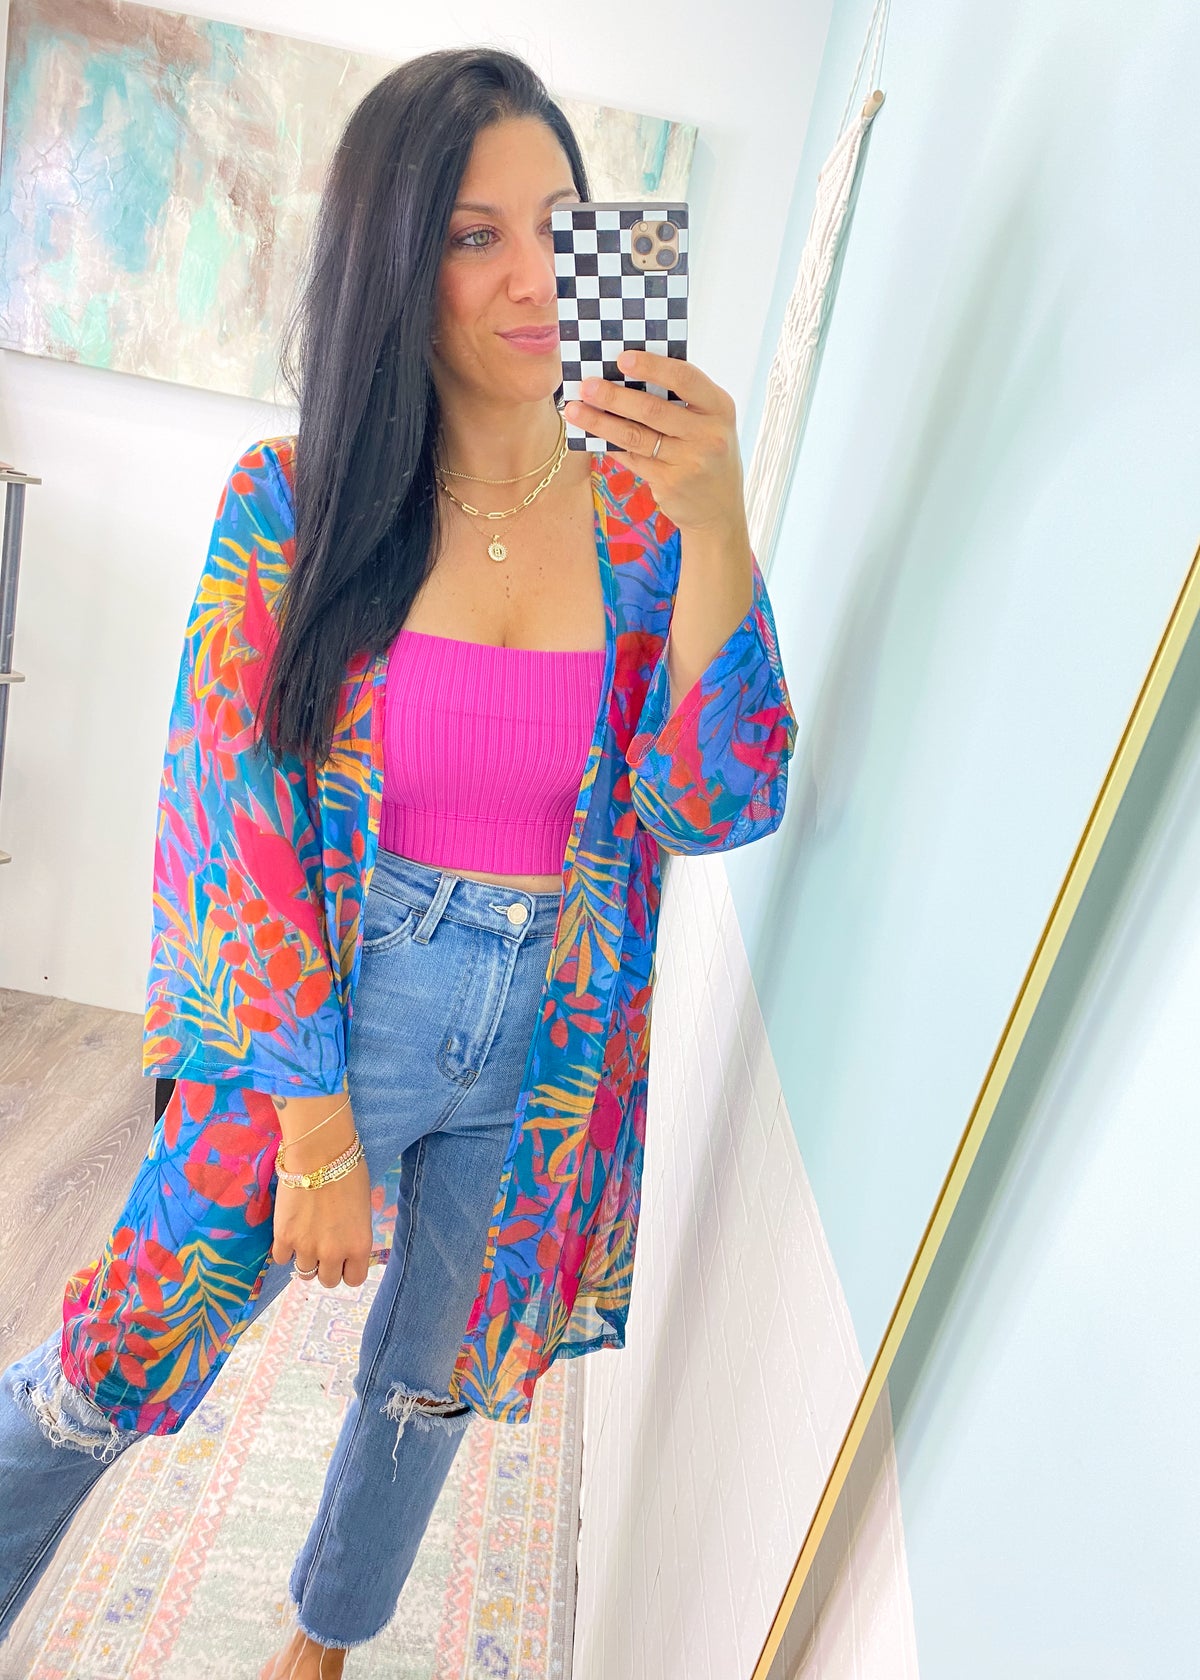 'Paradise Awaits' Turquoise Tropical Print Kimono-The gorgeous colors in this tropical print kimono will turn heads! Pops of pink &amp; orange on a turquoise base is beach &amp; Summer days ready! Wear as part of your outfit or as a bathing suit coverup-Cali Moon Boutique, Plainville Connecticut